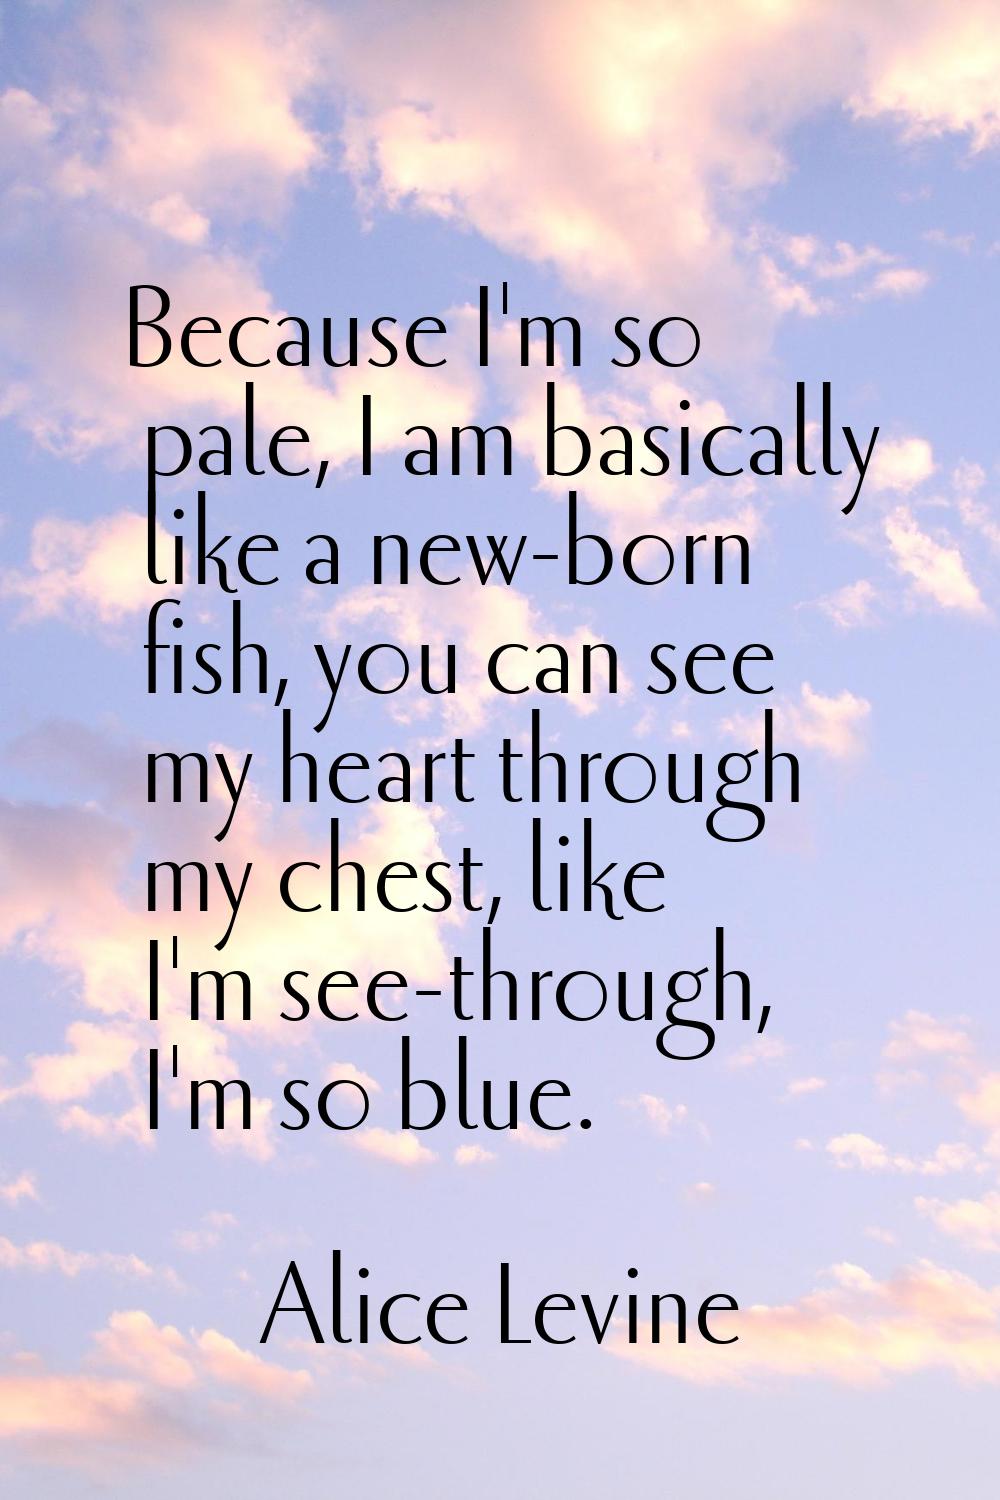 Because I'm so pale, I am basically like a new-born fish, you can see my heart through my chest, li